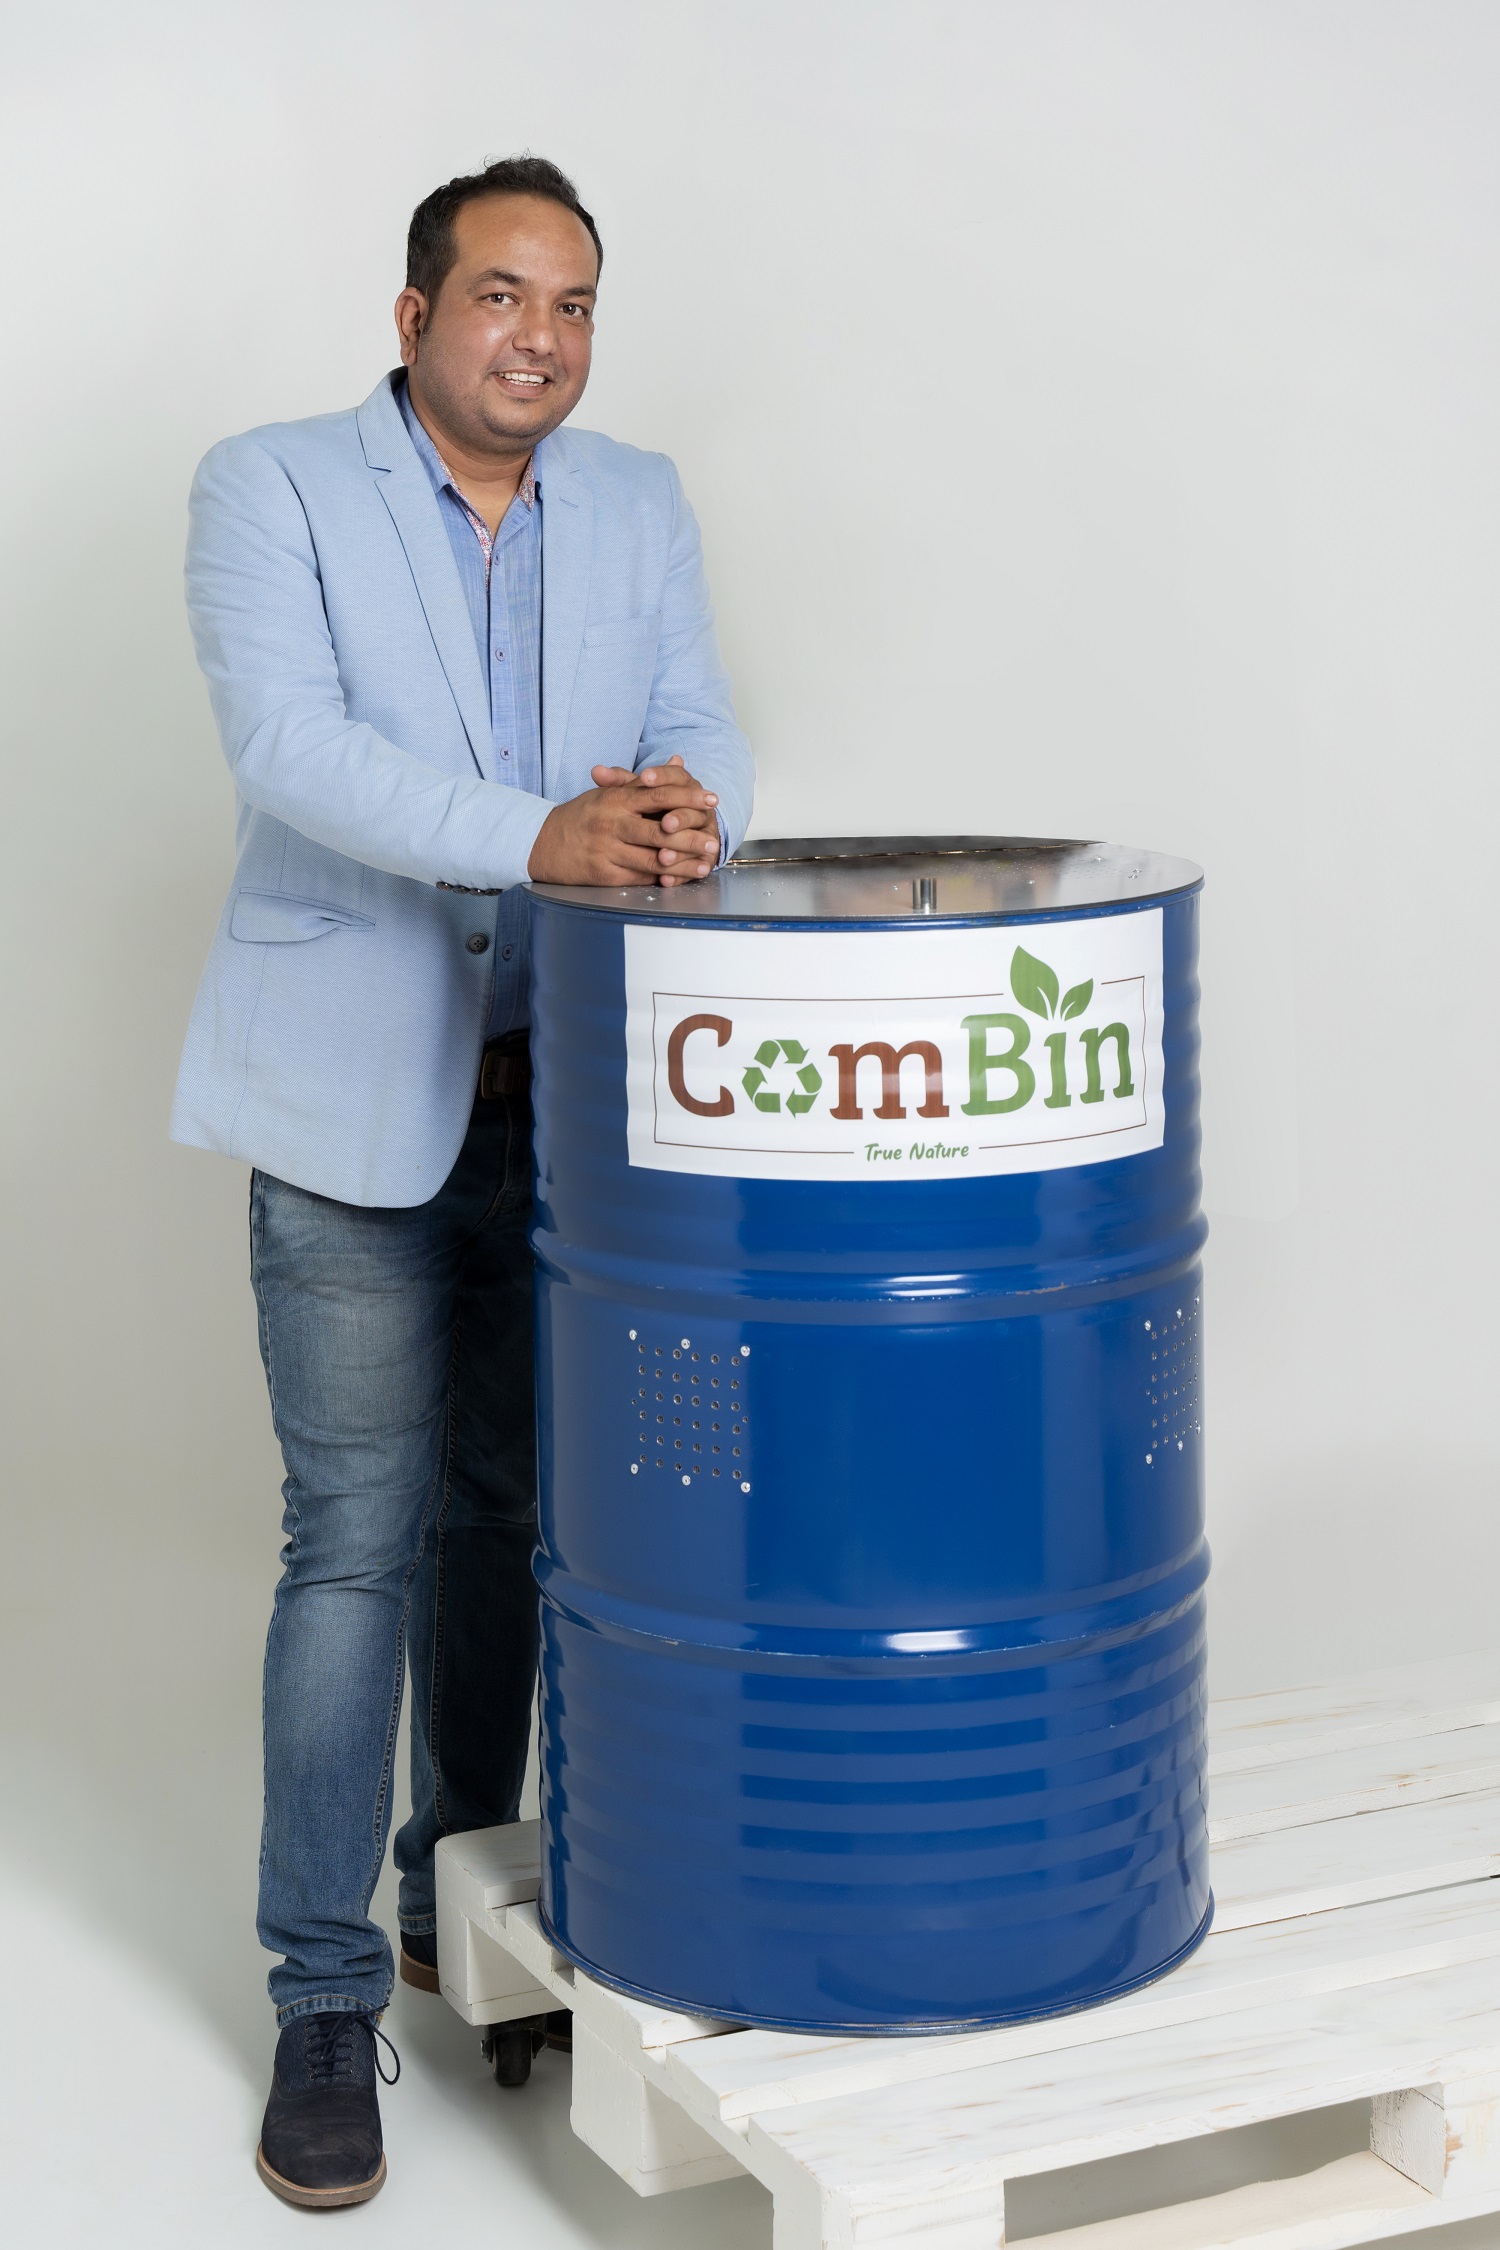 Image for Big Farm Brothers Introduces ComBin, A Break-Through Move To Make The UAE A Soil Sufficient And Green City